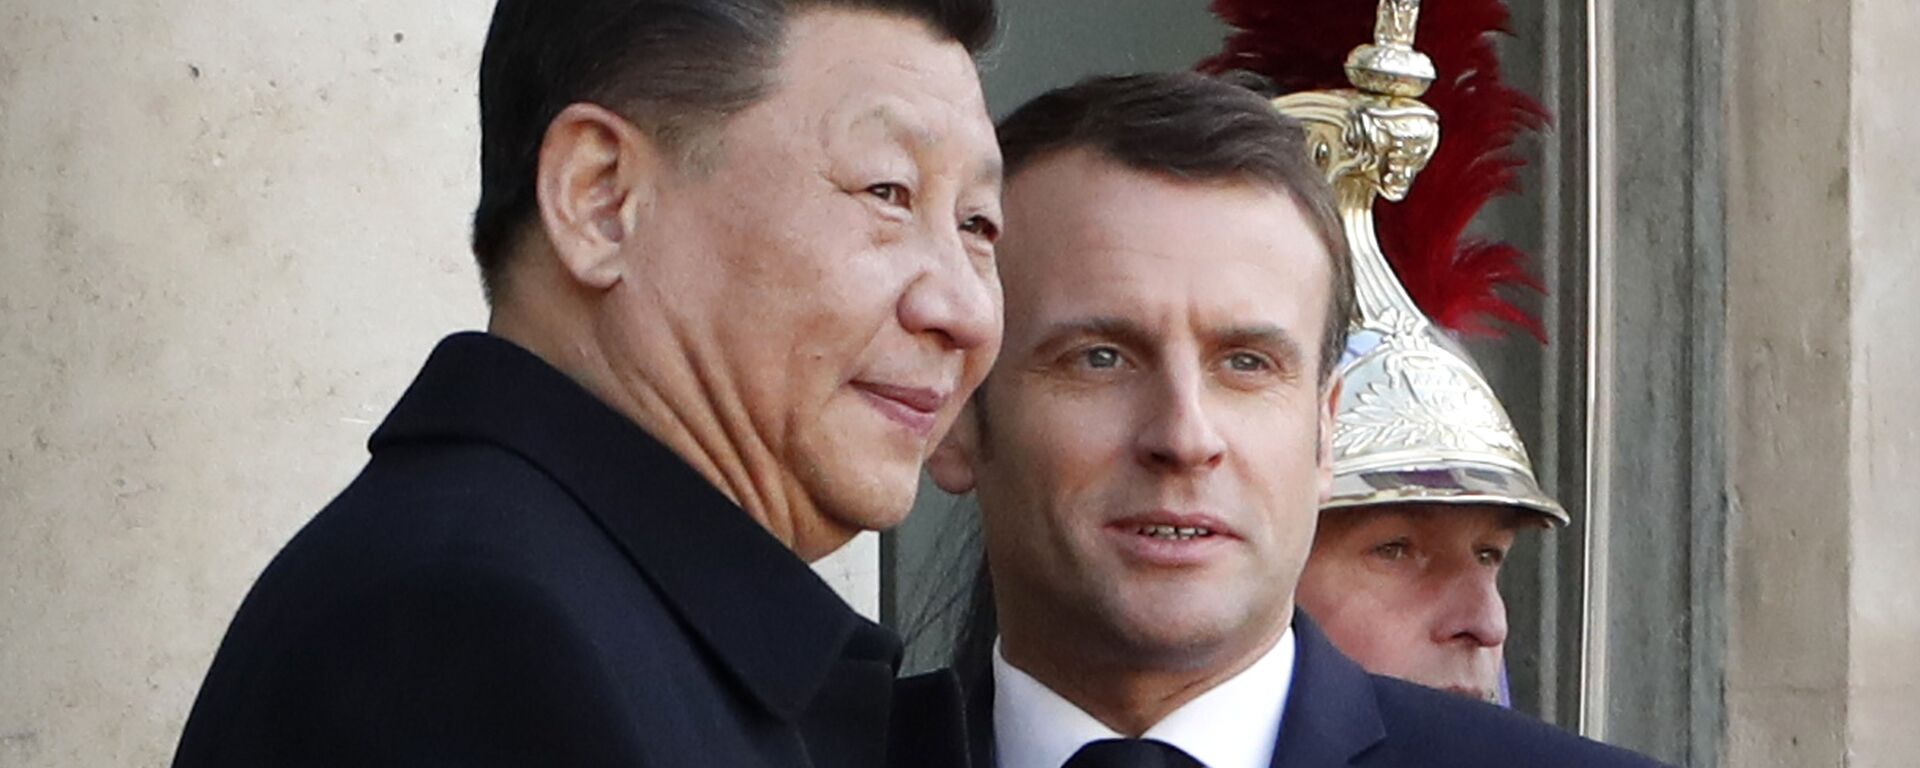 French President Emmanuel Macron, right, welcomes his Chinese counterpart Xi Jinping prior to a meeting at the Elysee Palace, in Paris, Monday, March 25, 2019. - Sputnik International, 1920, 17.02.2022